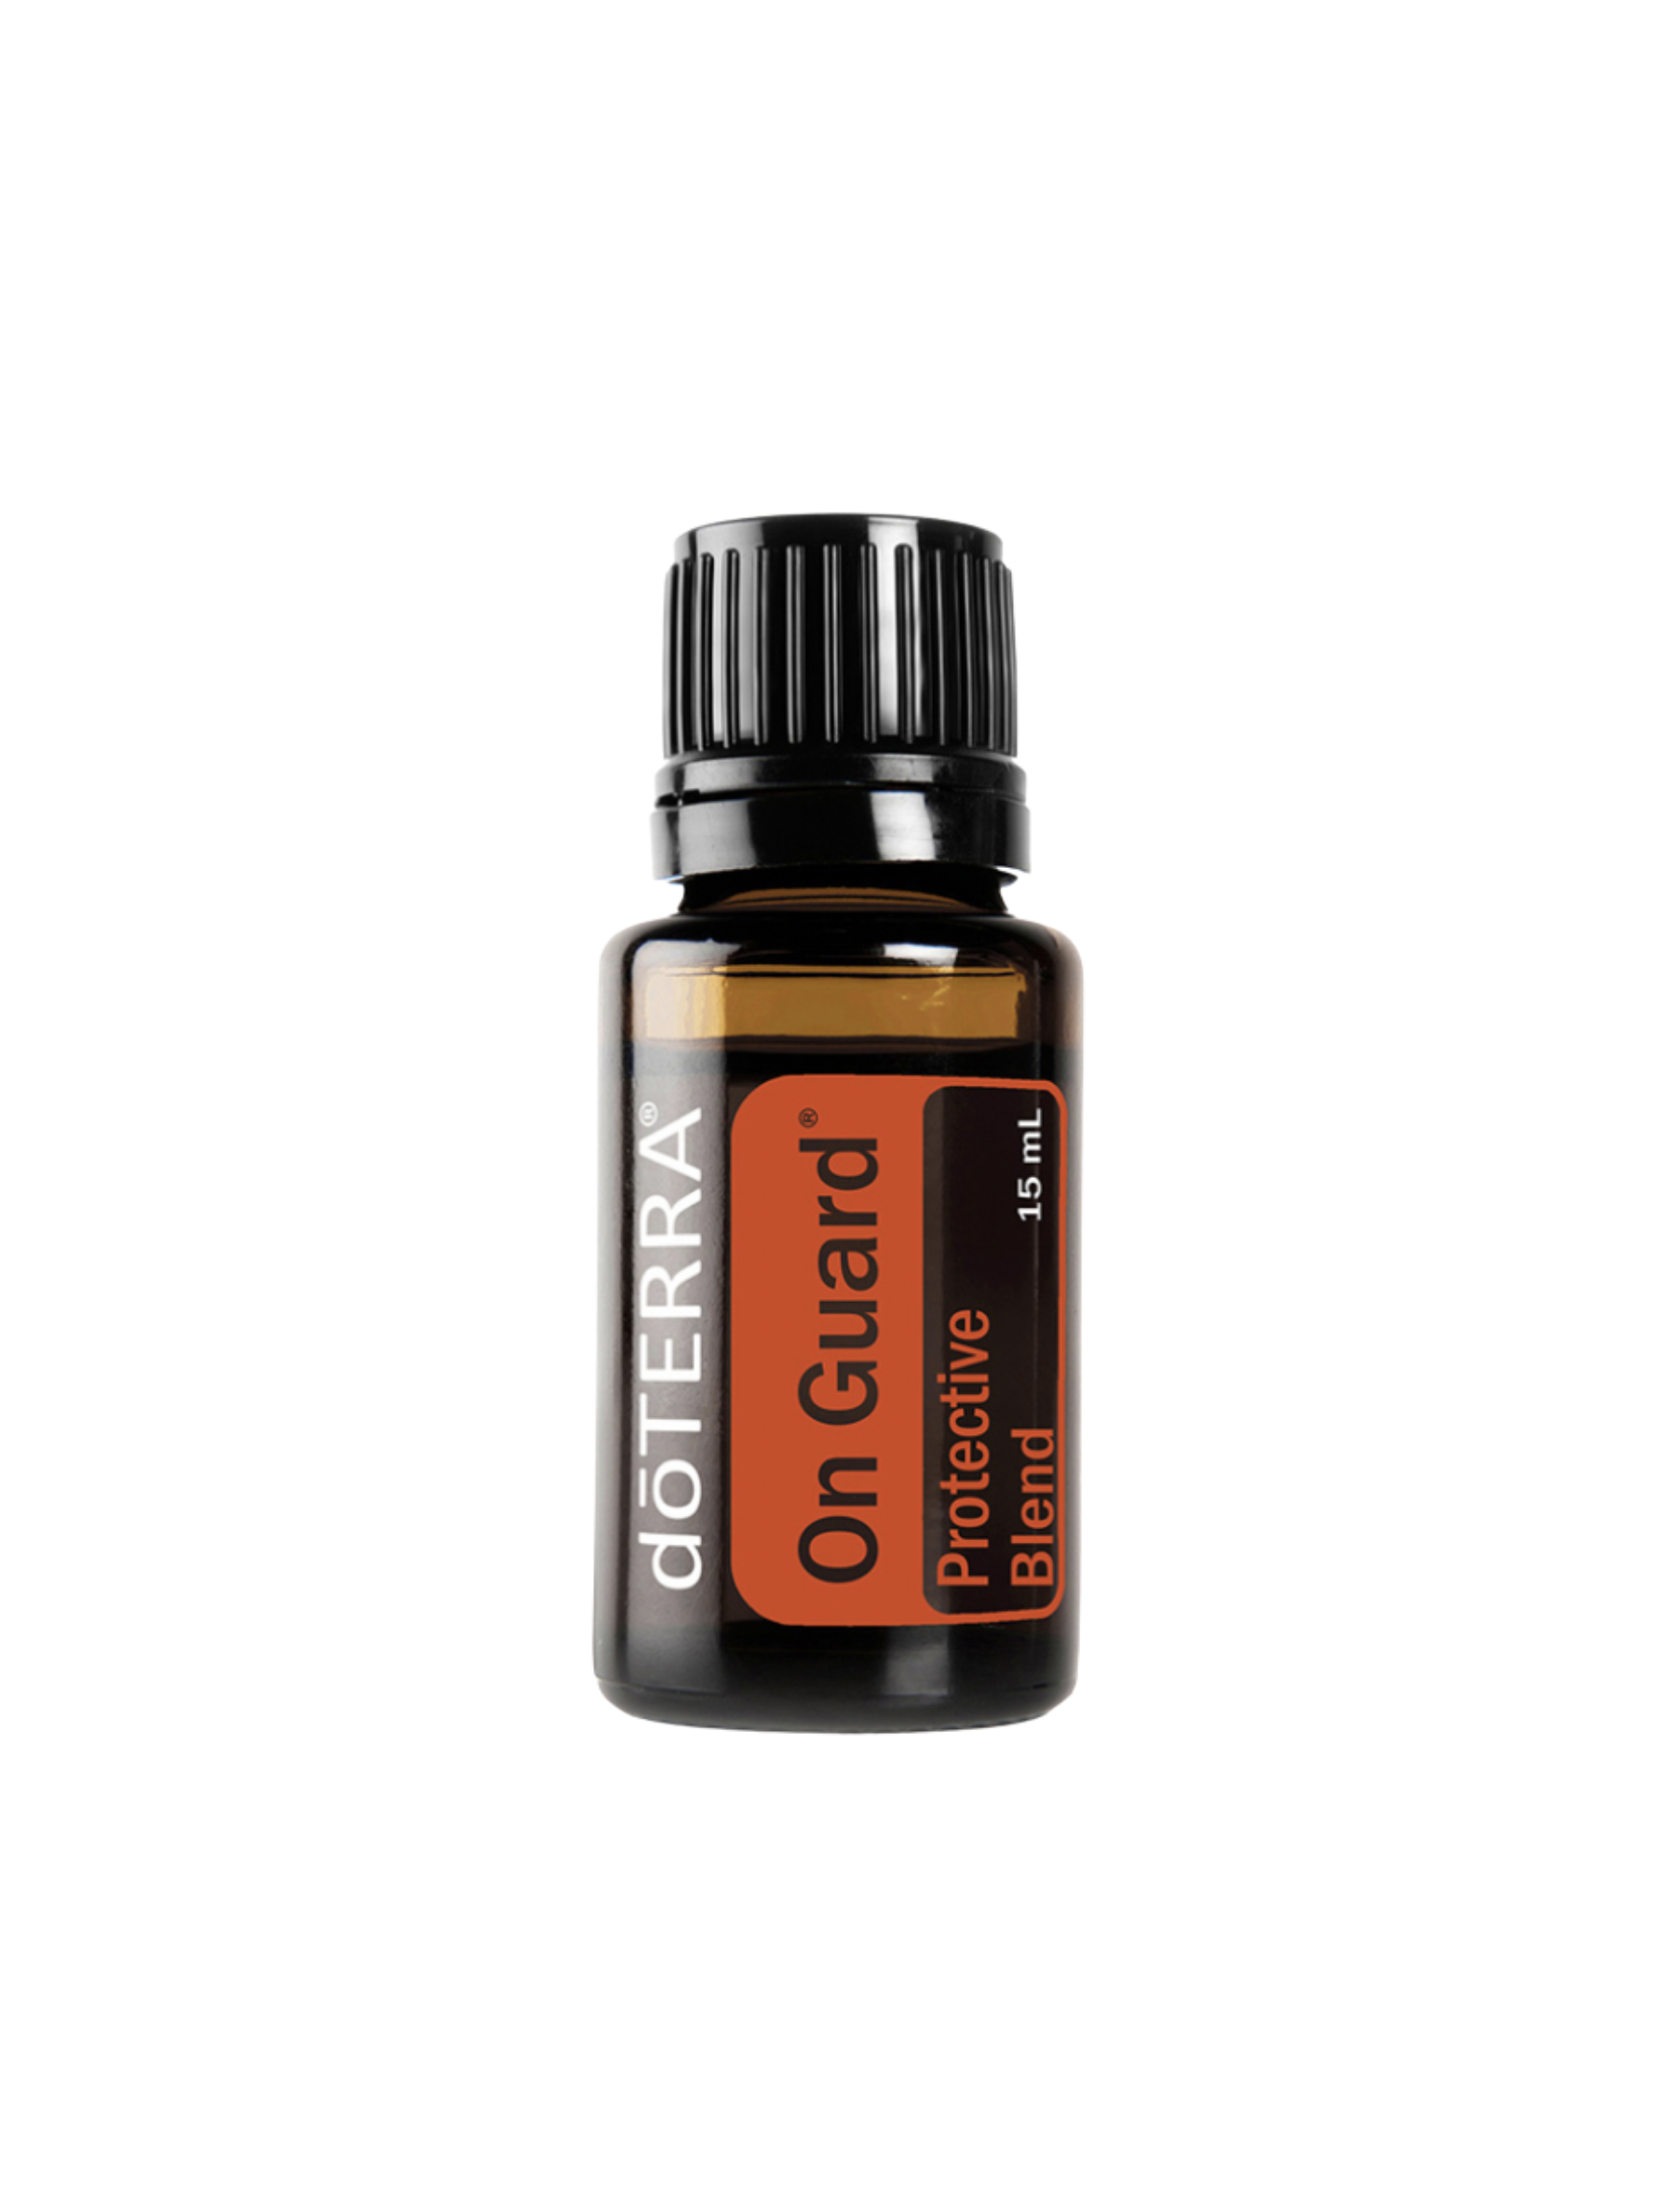  On Guard is a powerful proprietary blend that supports healthy immune function when used internally* and contains cleansing properties. 